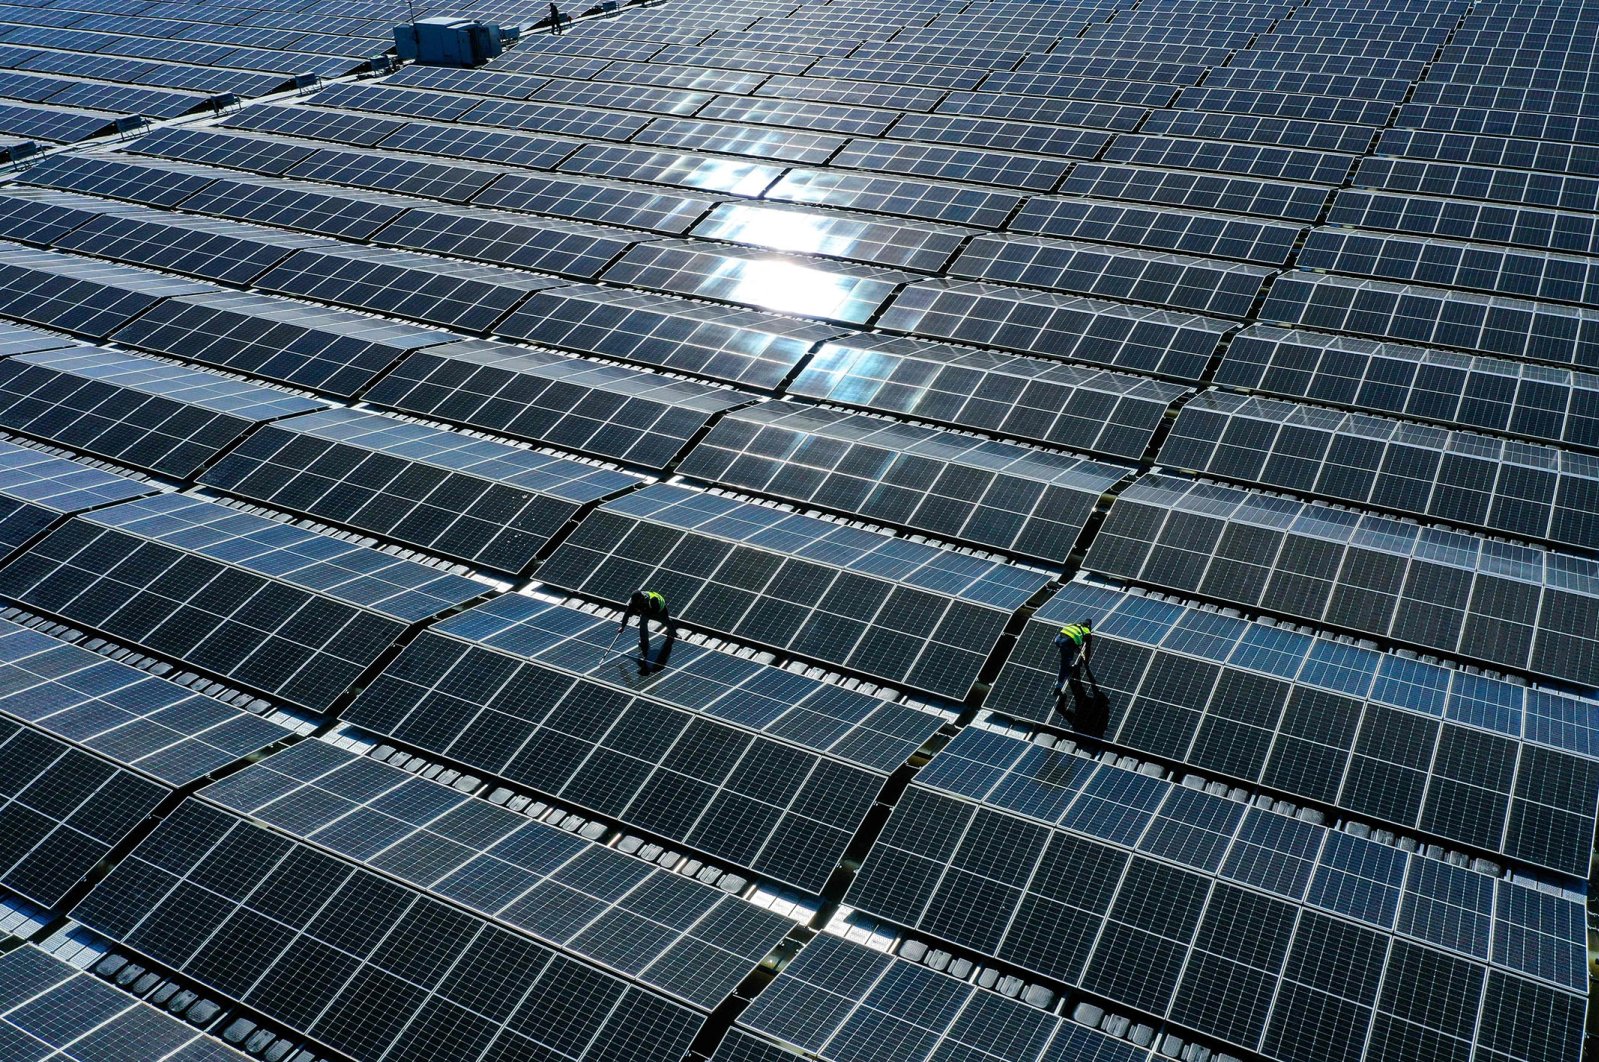 An aerial view shows workers assembling solar panels at a floating photovoltaic plant on the Silbersee lake in Haltern, western Germany, April 22, 2022. (AFP Photo)